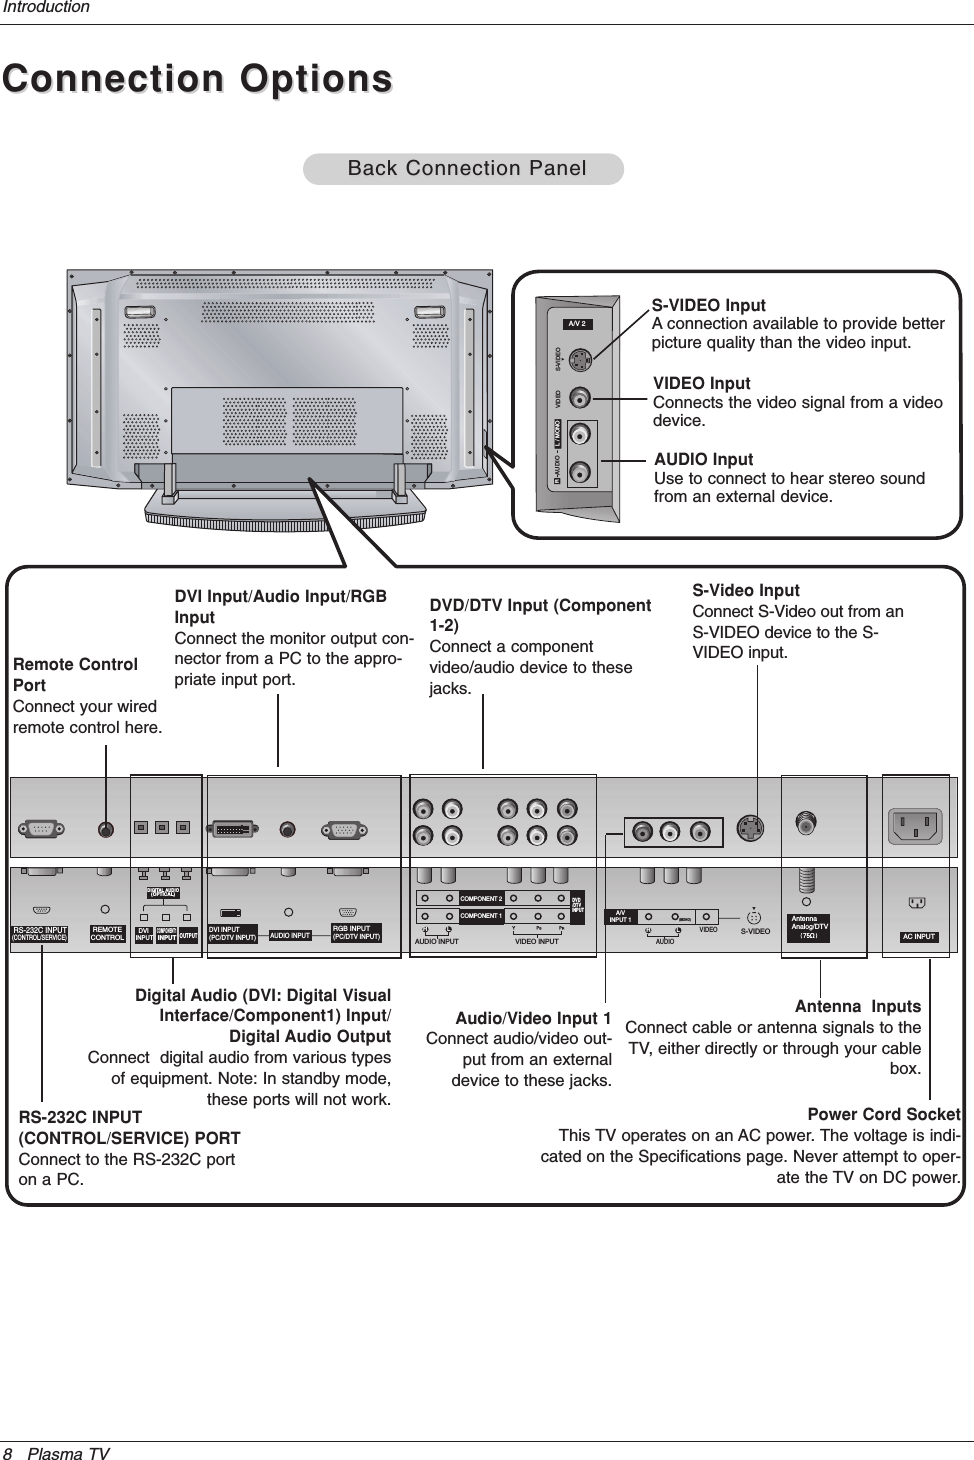 8 Plasma TVIntroductionConnection OptionsConnection OptionsRS-VIDEO VIDEO  L / MONO AUDIO A/V 2 REMOTECONTROLRS-232C INPUT(CONTROL/SERVICE)AC INPUTAUDIO INPUTCOMPONENT 2COMPONENT 1RLDIGITAL AUDIO(OPTICAL)DVI INPUTCOMPONENT1 INPUTOUTPUTAUDIO INPUTDVI INPUT(PC/DTV INPUT)RGB INPUT(PC/DTV INPUT)VIDEO INPUTDVD/DTVINPUTA/VINPUT 1AUDIORL(MONO)VIDEOS-VIDEOAntenna  Analog/DTVBack Connection PanelBack Connection PanelAntenna  InputsConnect cable or antenna signals to theTV, either directly or through your cablebox. DVI Input/Audio Input/RGBInputConnect the monitor output con-nector from a PC to the appro-priate input port.Digital Audio (DVI: Digital VisualInterface/Component1) Input/Digital Audio OutputConnect  digital audio from various typesof equipment. Note: In standby mode, these ports will not work.Audio/Video Input 1Connect audio/video out-put from an externaldevice to these jacks.DVD/DTV Input (Component1-2)Connect a componentvideo/audio device to thesejacks.Remote ControlPortConnect your wiredremote control here.S-Video InputConnect S-Video out from anS-VIDEO device to the S-VIDEO input.Power Cord SocketThis TV operates on an AC power. The voltage is indi-cated on the Specifications page. Never attempt to oper-ate the TV on DC power.S-VIDEO InputA connection available to provide betterpicture quality than the video input.VIDEO InputConnects the video signal from a videodevice.AUDIO InputUse to connect to hear stereo soundfrom an external device.RS-232C INPUT(CONTROL/SERVICE) PORTConnect to the RS-232C porton a PC.